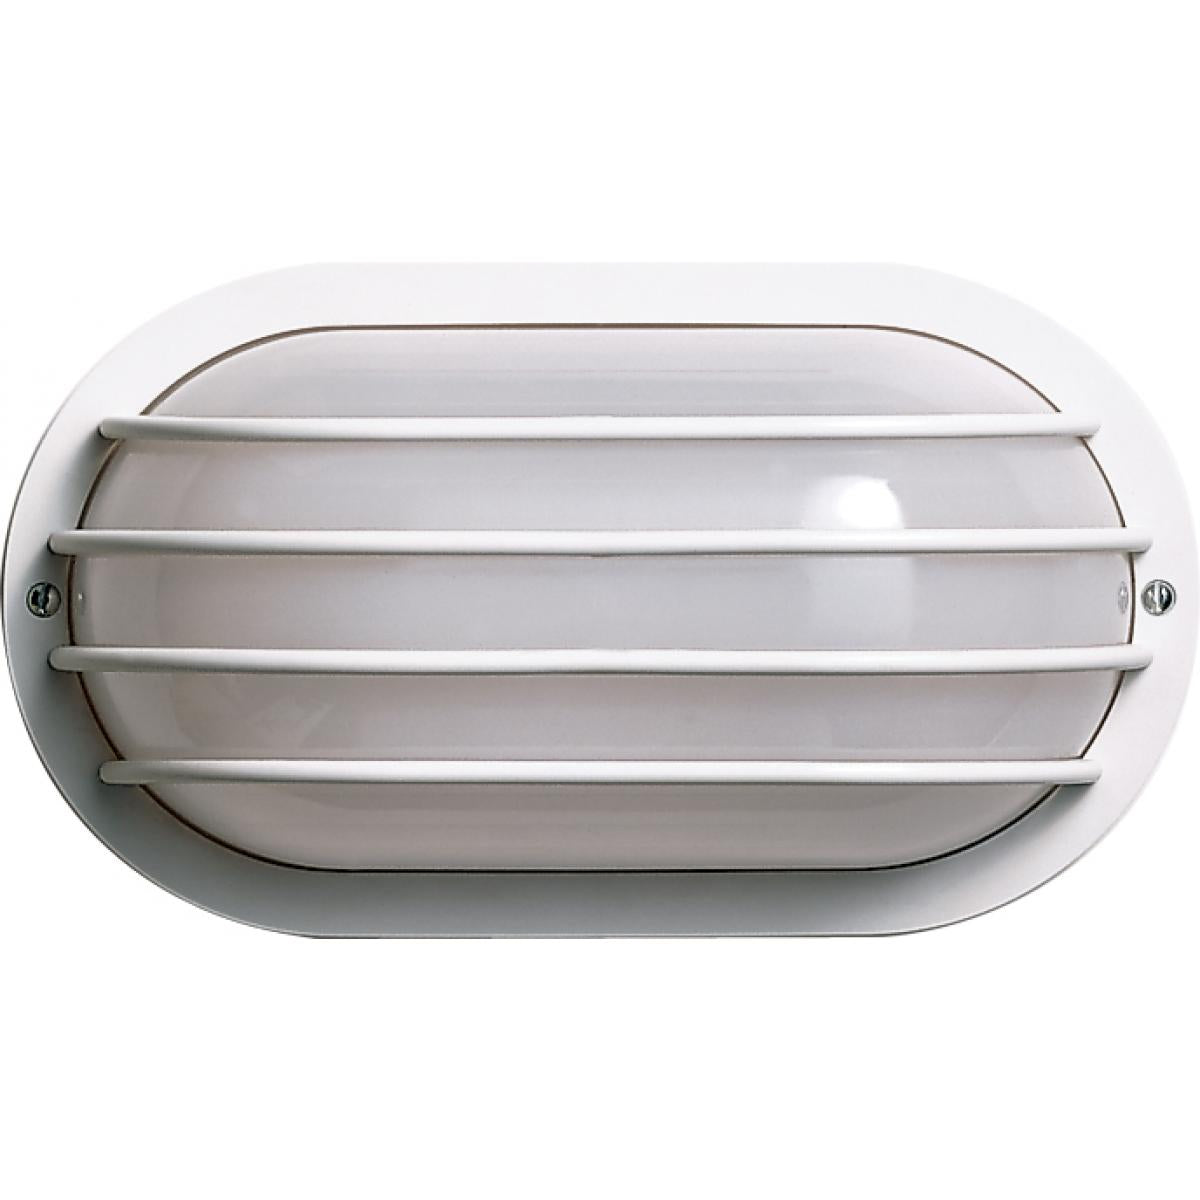 Satco 77-858 1 Light - 10" - Oval Cage Wall Fixture - Polysynthetic Body & Lens - White Finish